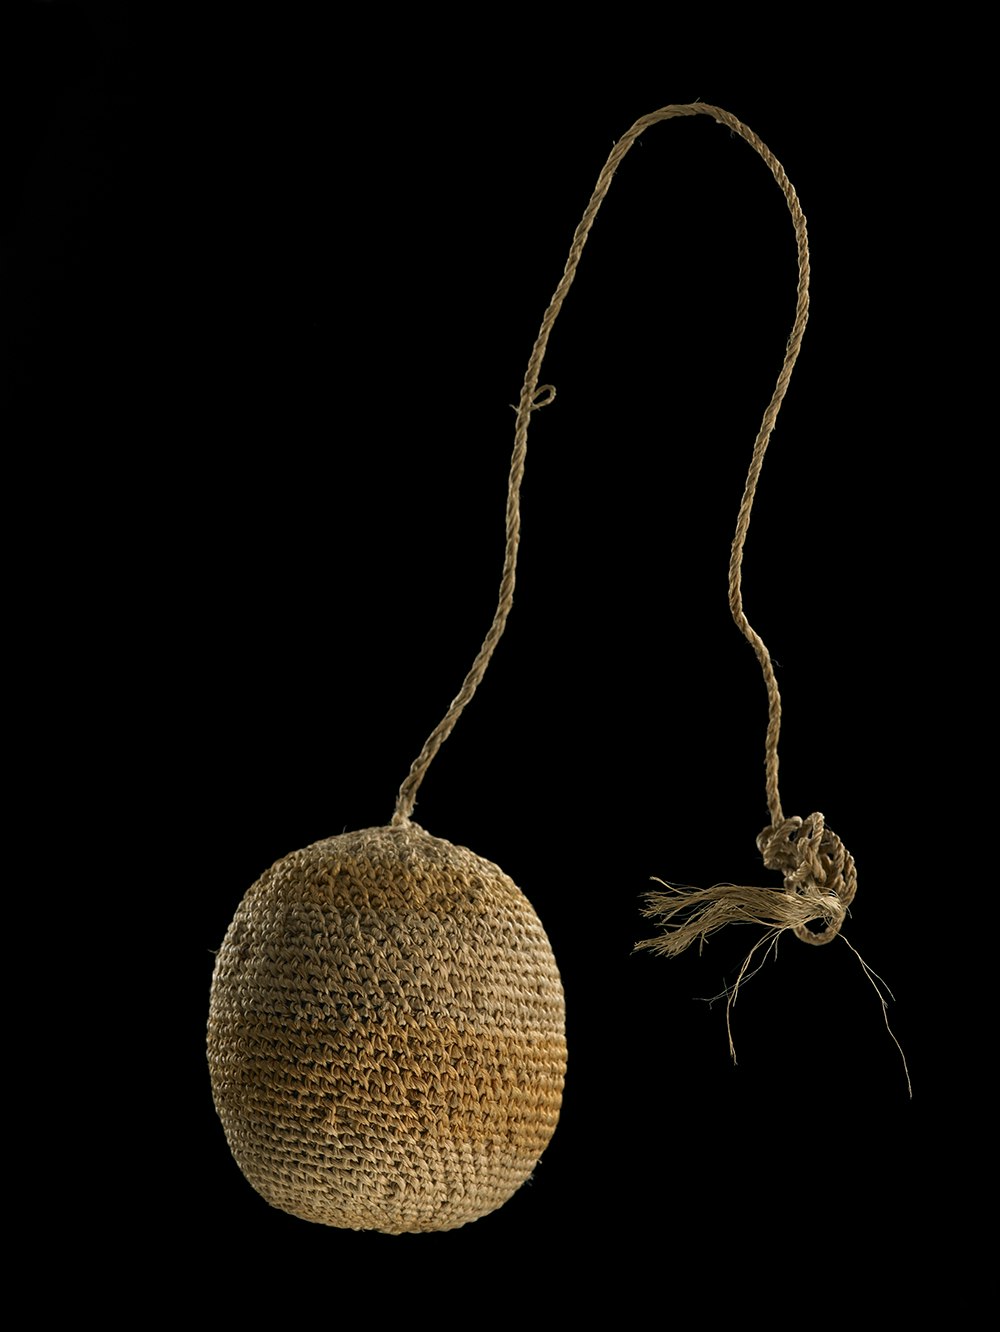 A woven ball with a cord connected to it